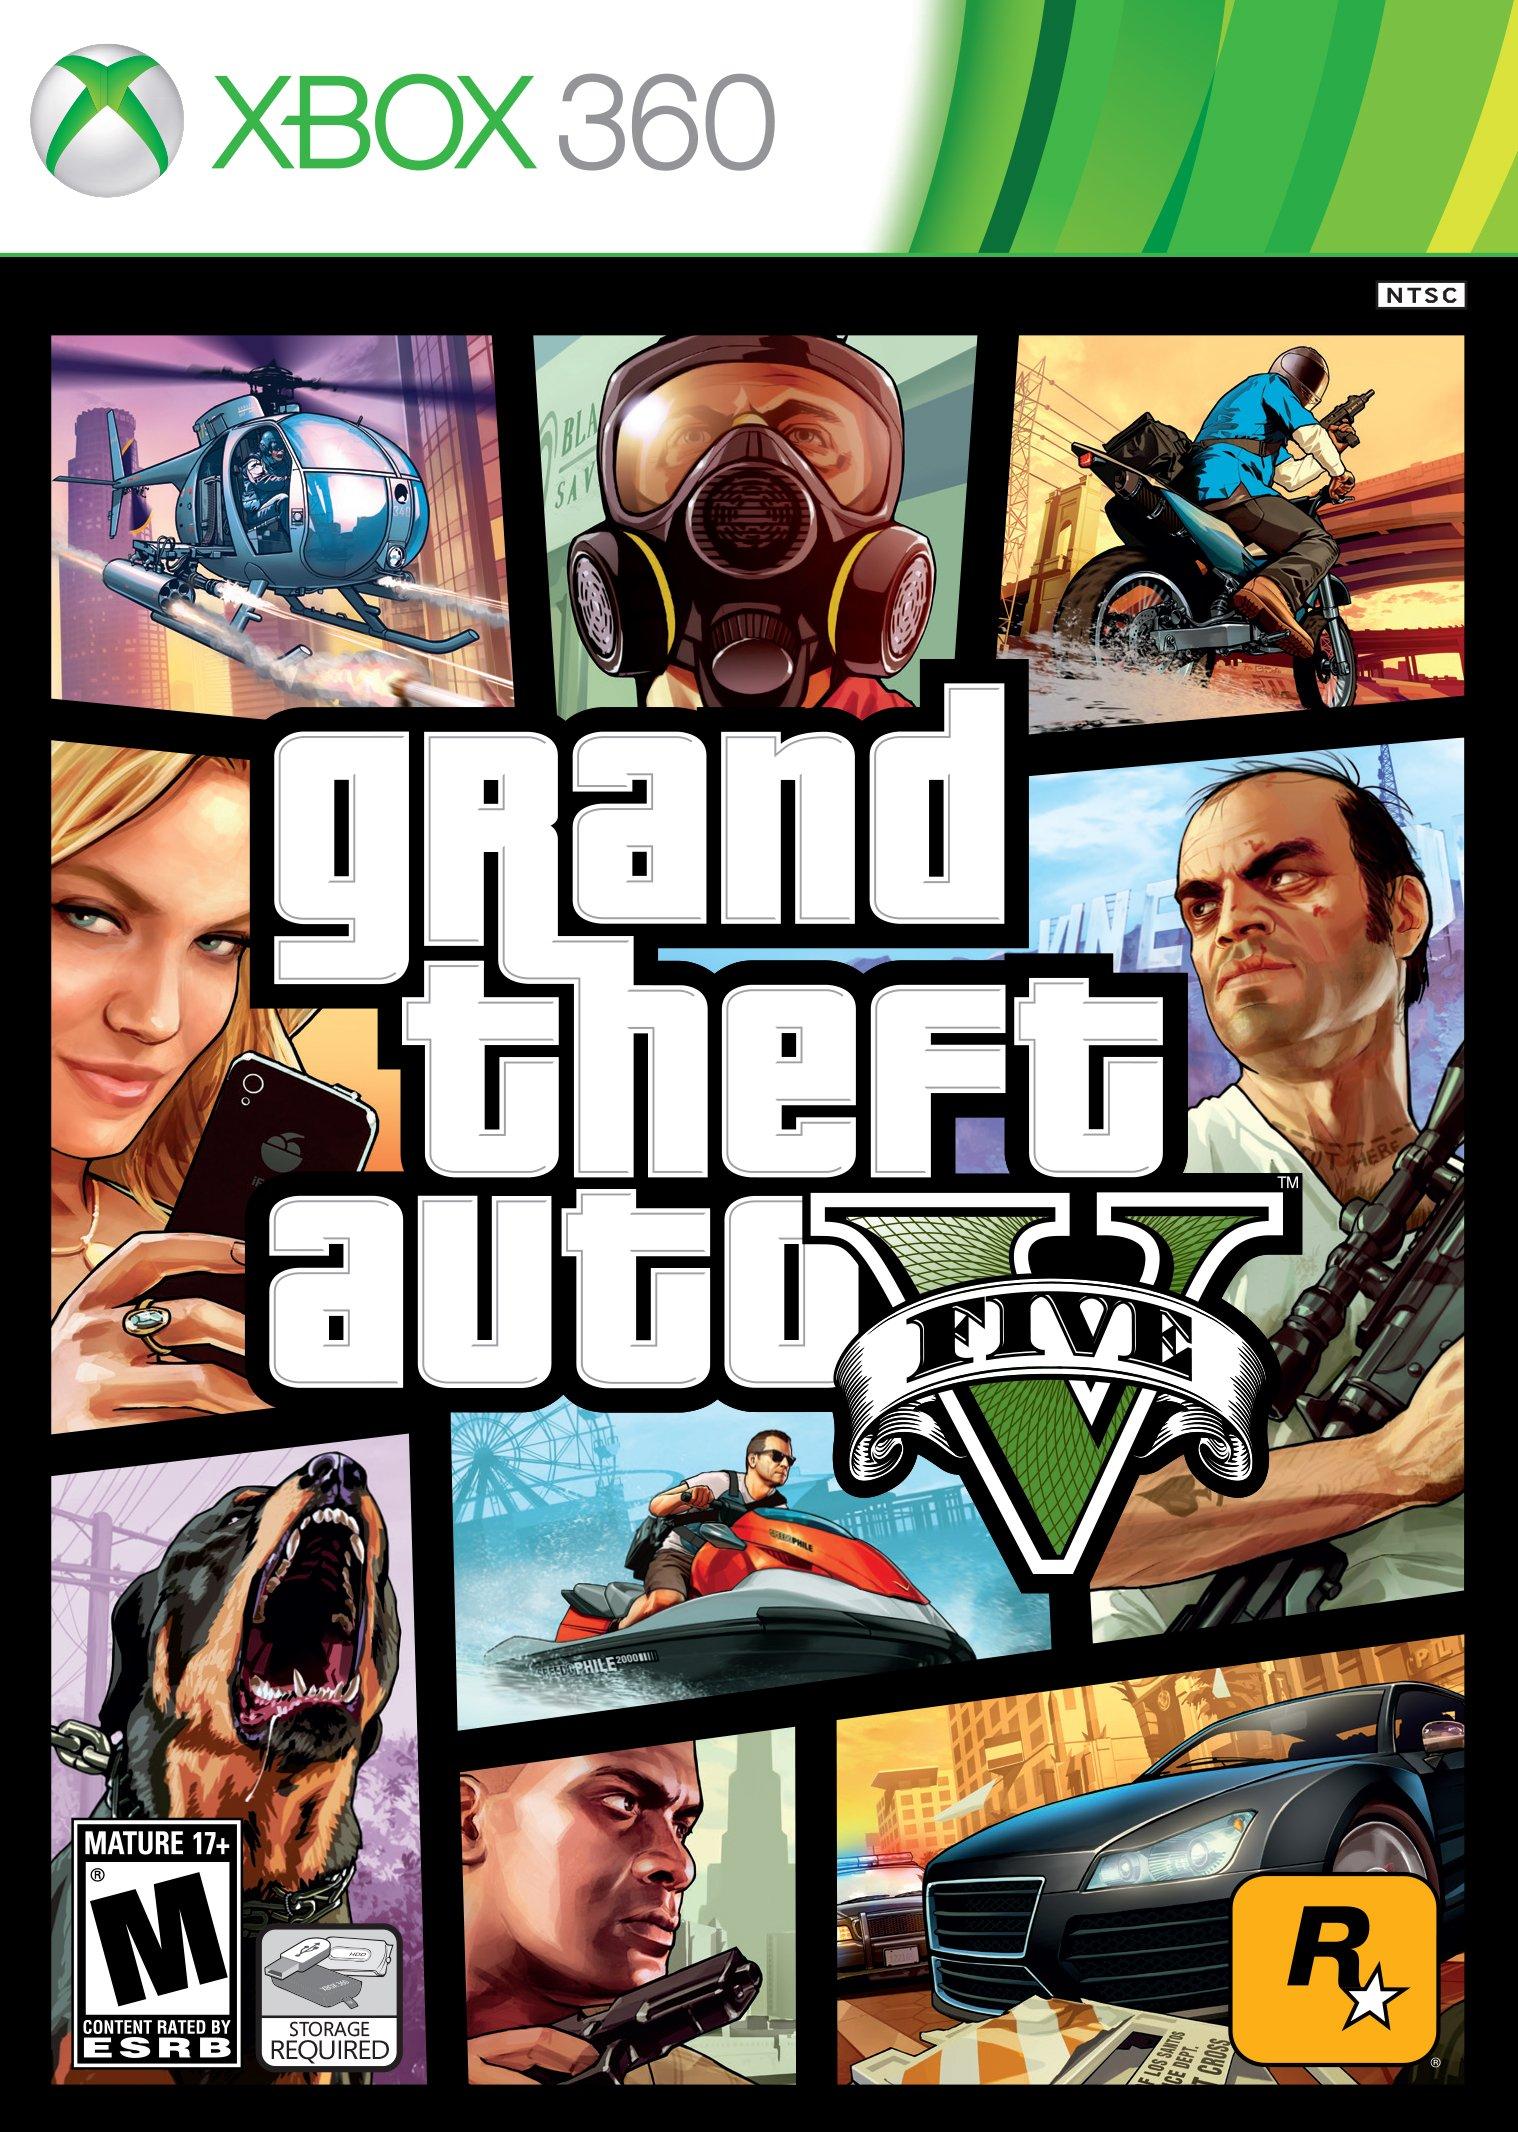 video moral lugt GTA 5: Grand Theft Auto V for PS4 | GameStop